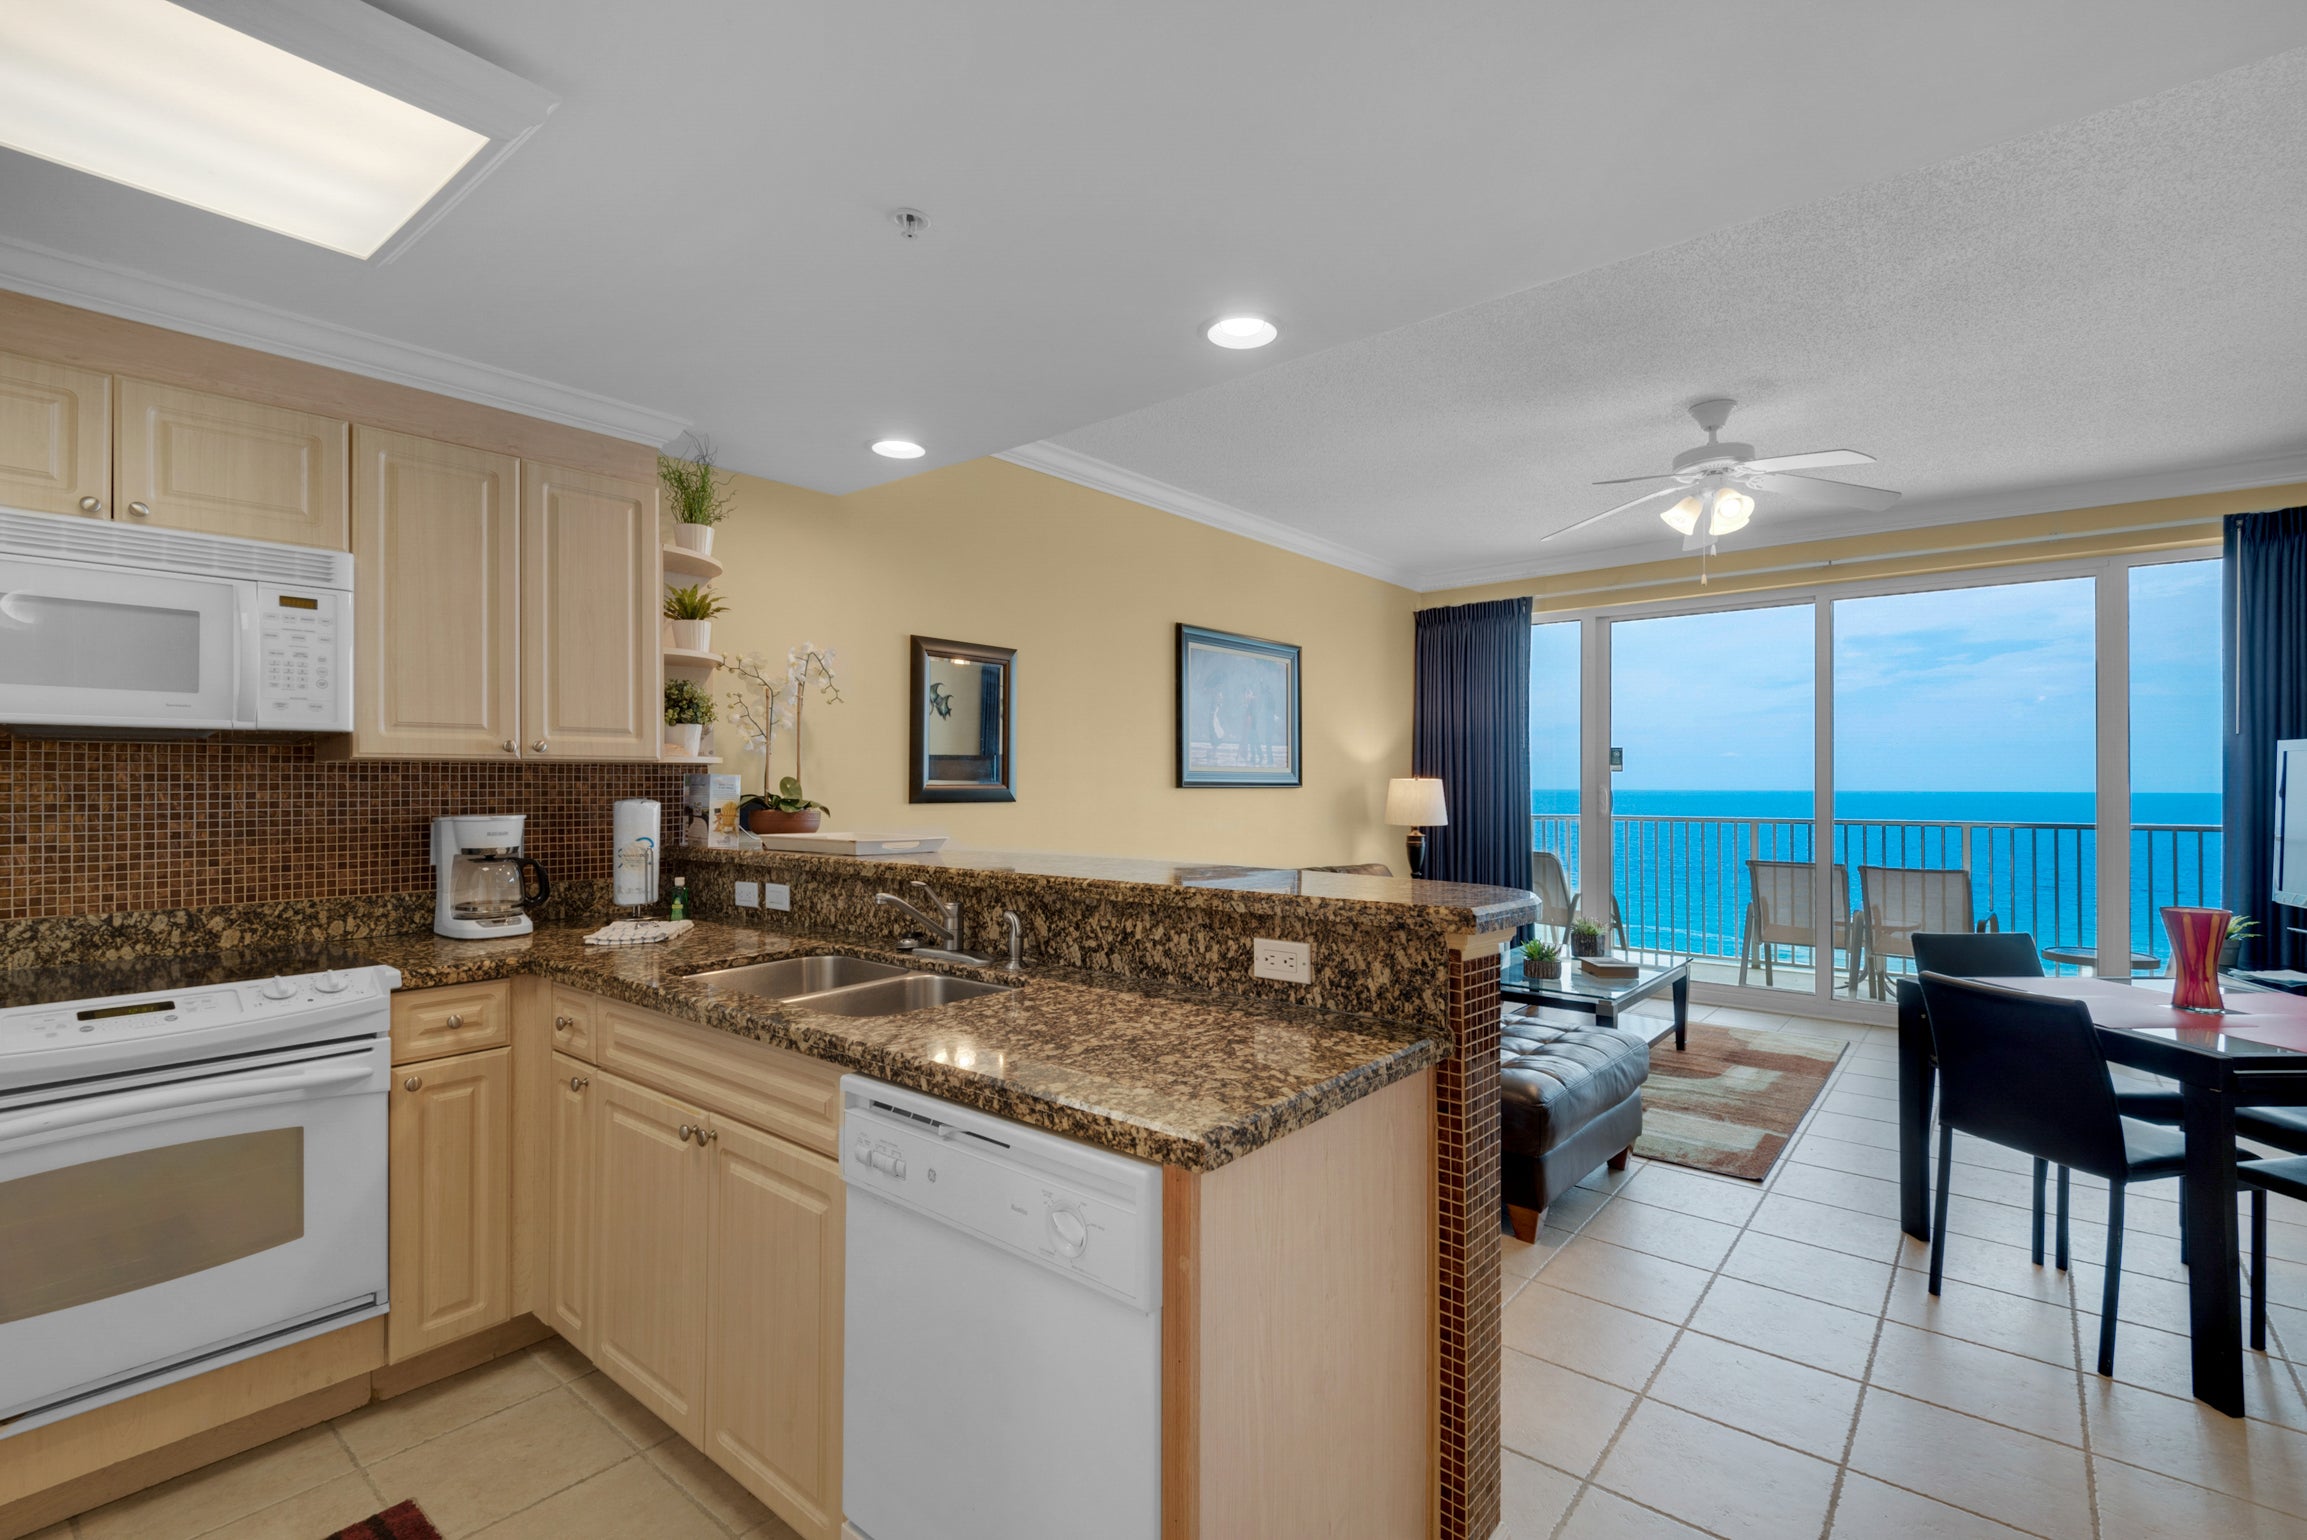 Boardwalk 1405 is spacious and beautiful